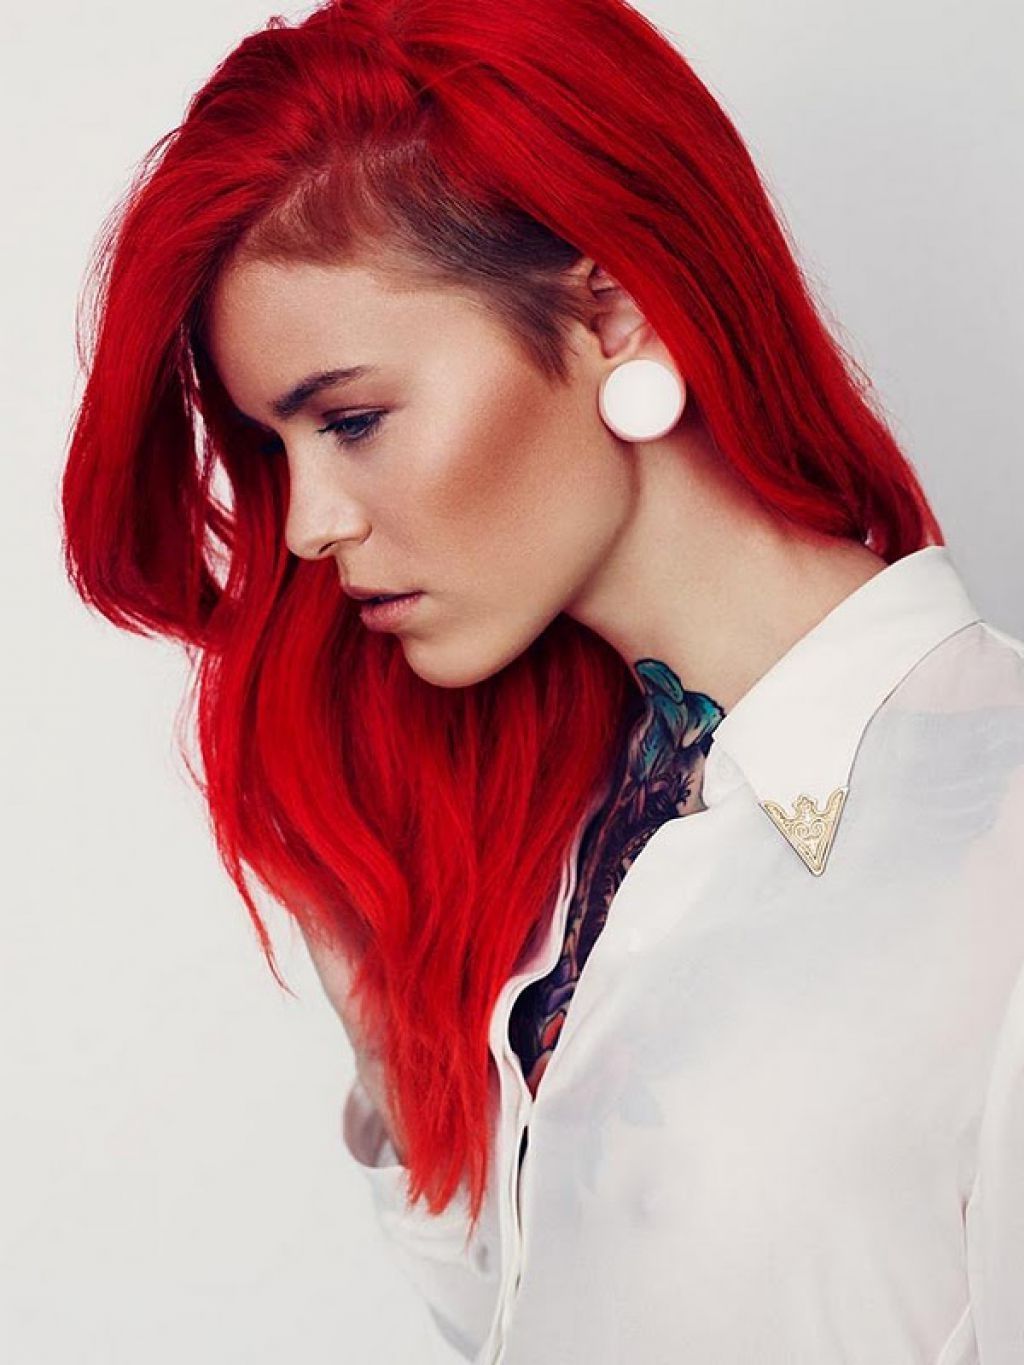 Most Up To Date Medium Hairstyles With Shaved Sides Pertaining To Medium Length Right Side Shaved Hair Style Red Long Hair With Shaved (View 3 of 20)